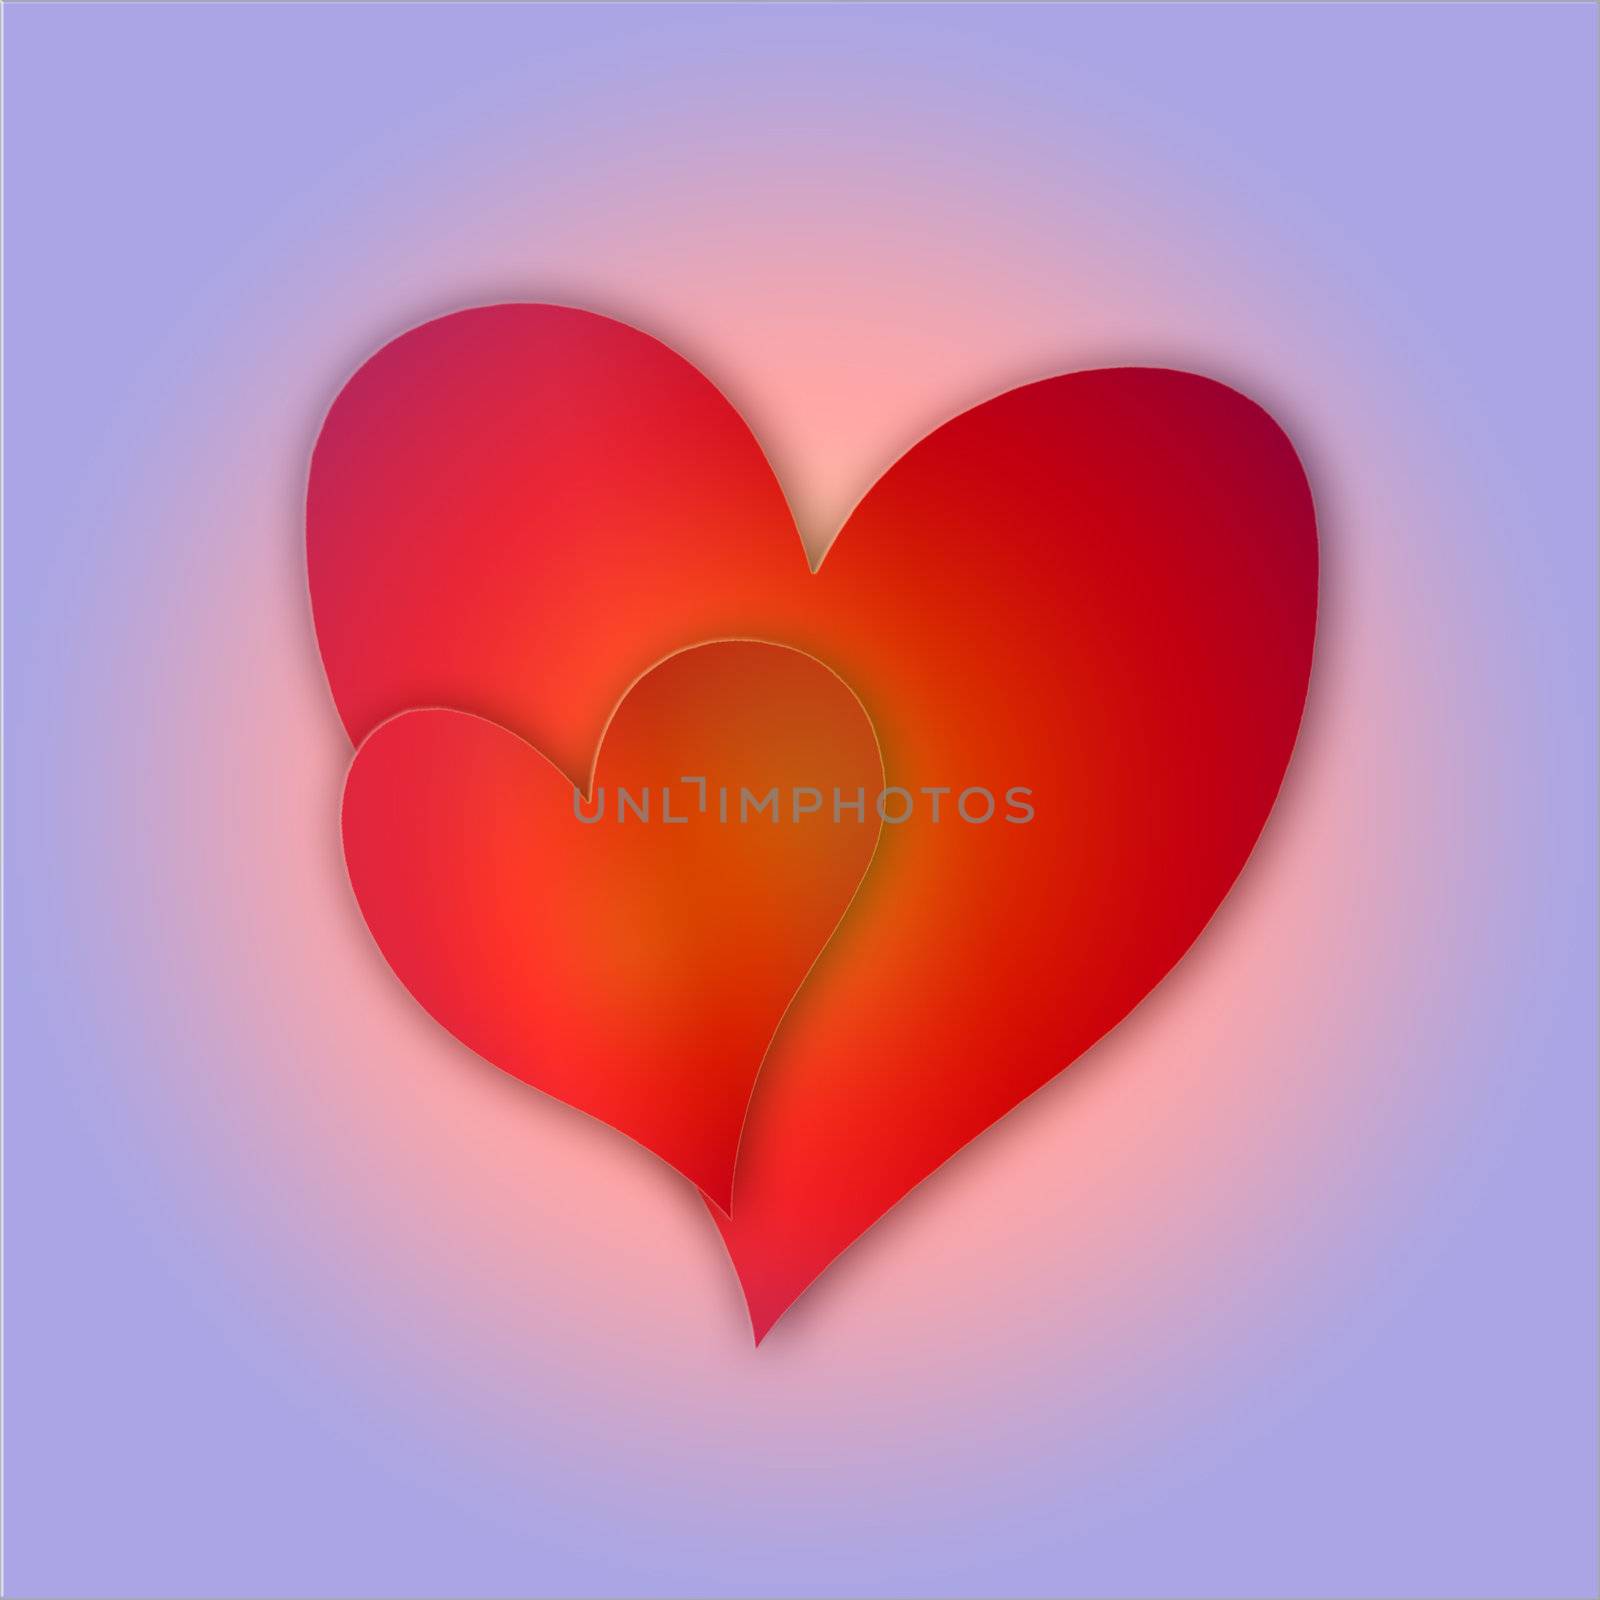 Heart background with ornate decoration